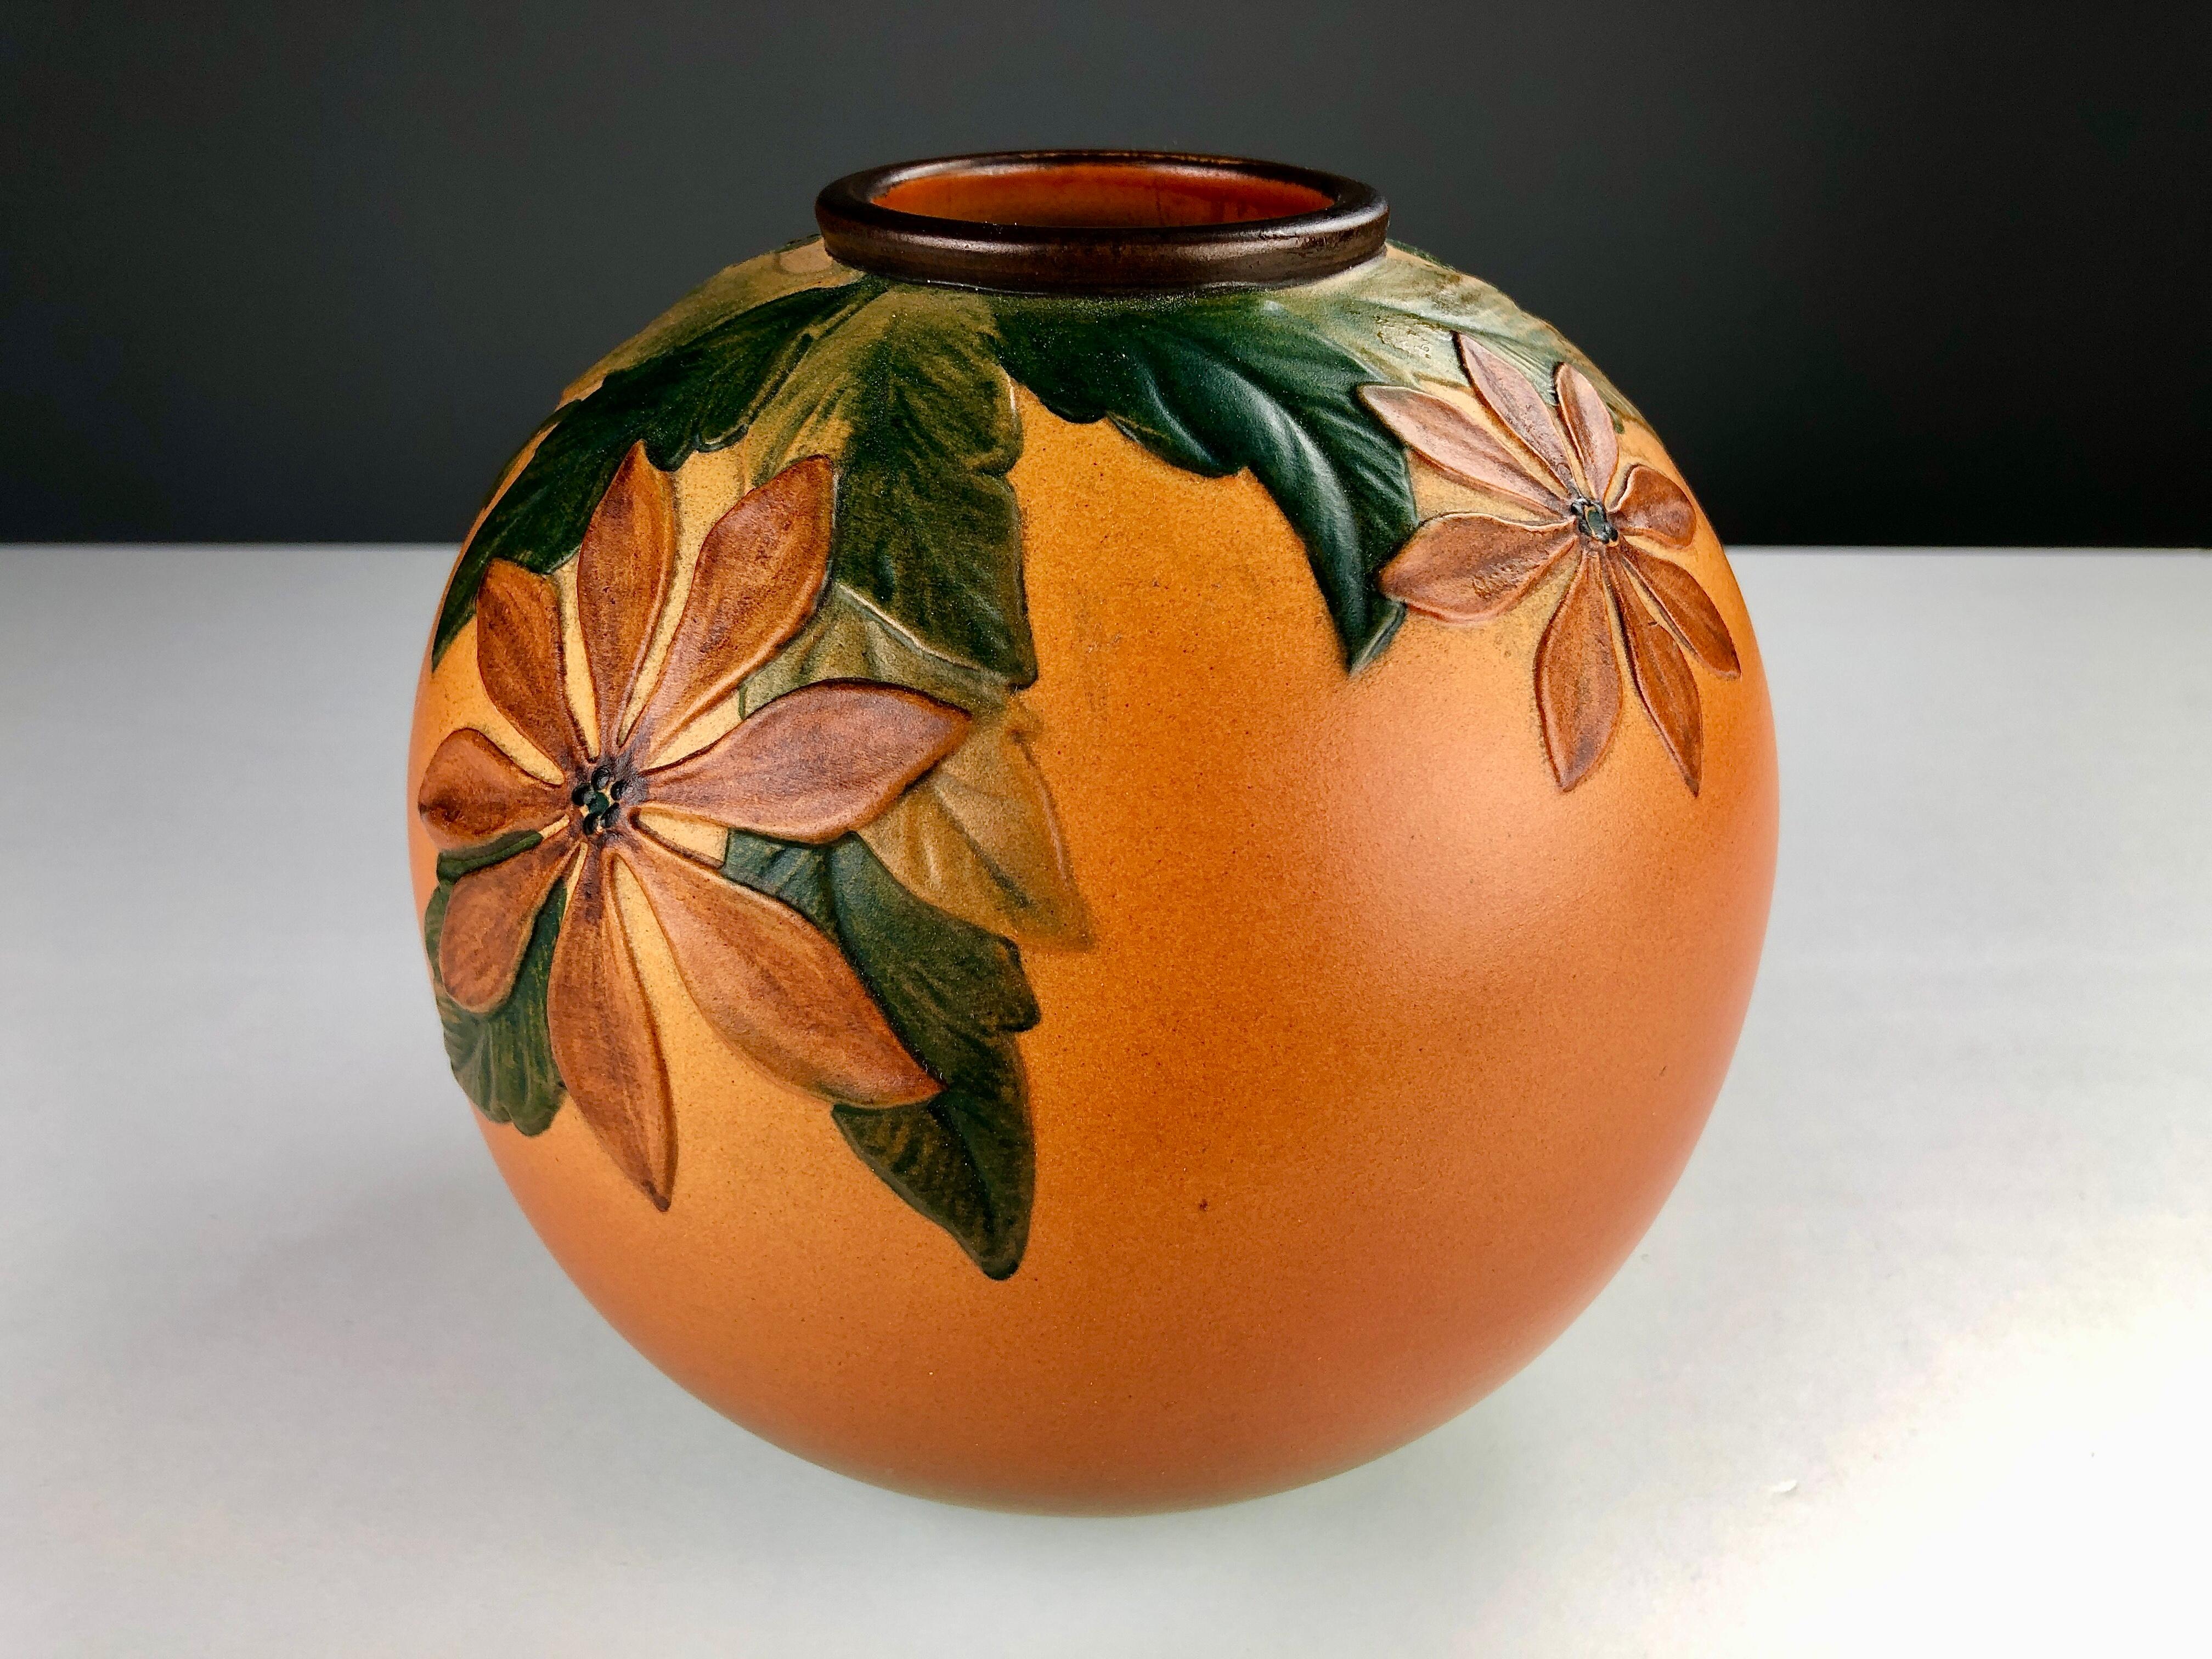 Hand-crafted Danish Art Nouveau flower decorated vase by P. Ipsens Enke

The art nouveau vase was designed by Axel Sørensen in 1939 and feature very well made lively flowers and leafs. The vases were hand-crafted why small variations occure from